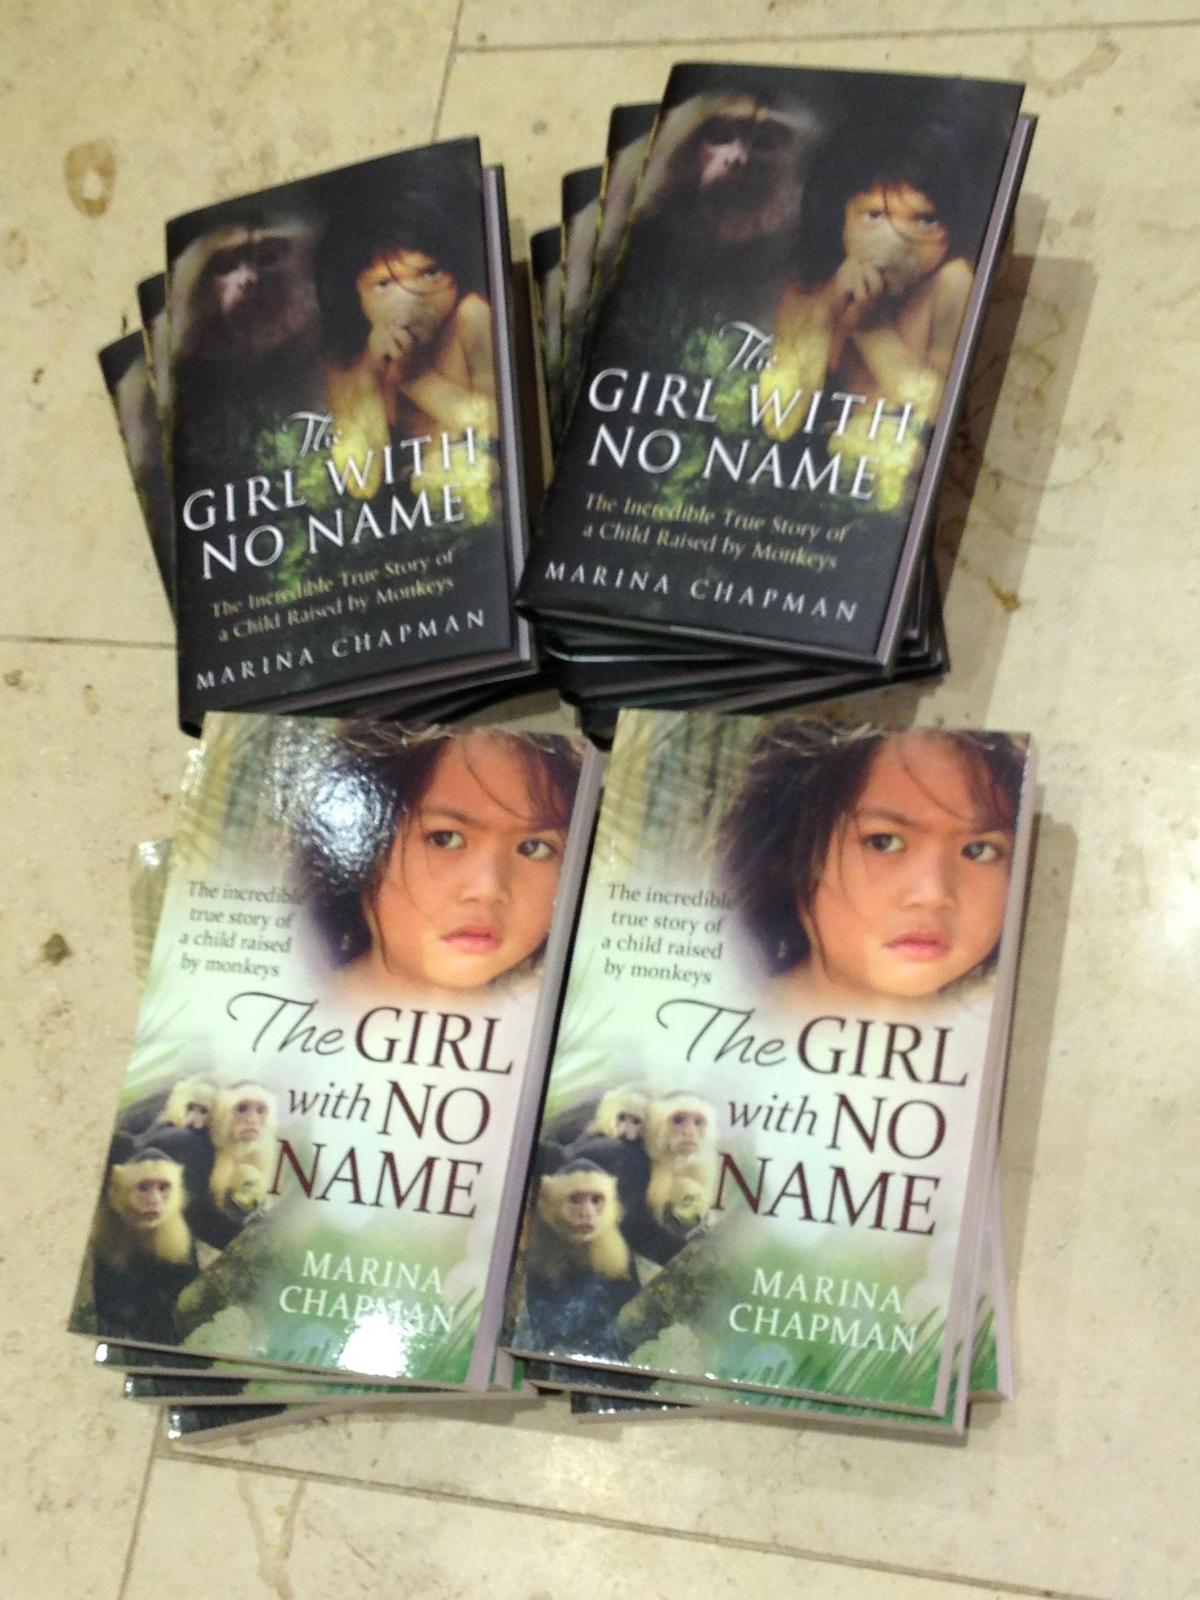 The first book on Marina Chapman's life, "The Girl With No Name," became a New York Times bestseller in 2013. (Courtesy of Marina Chapman)